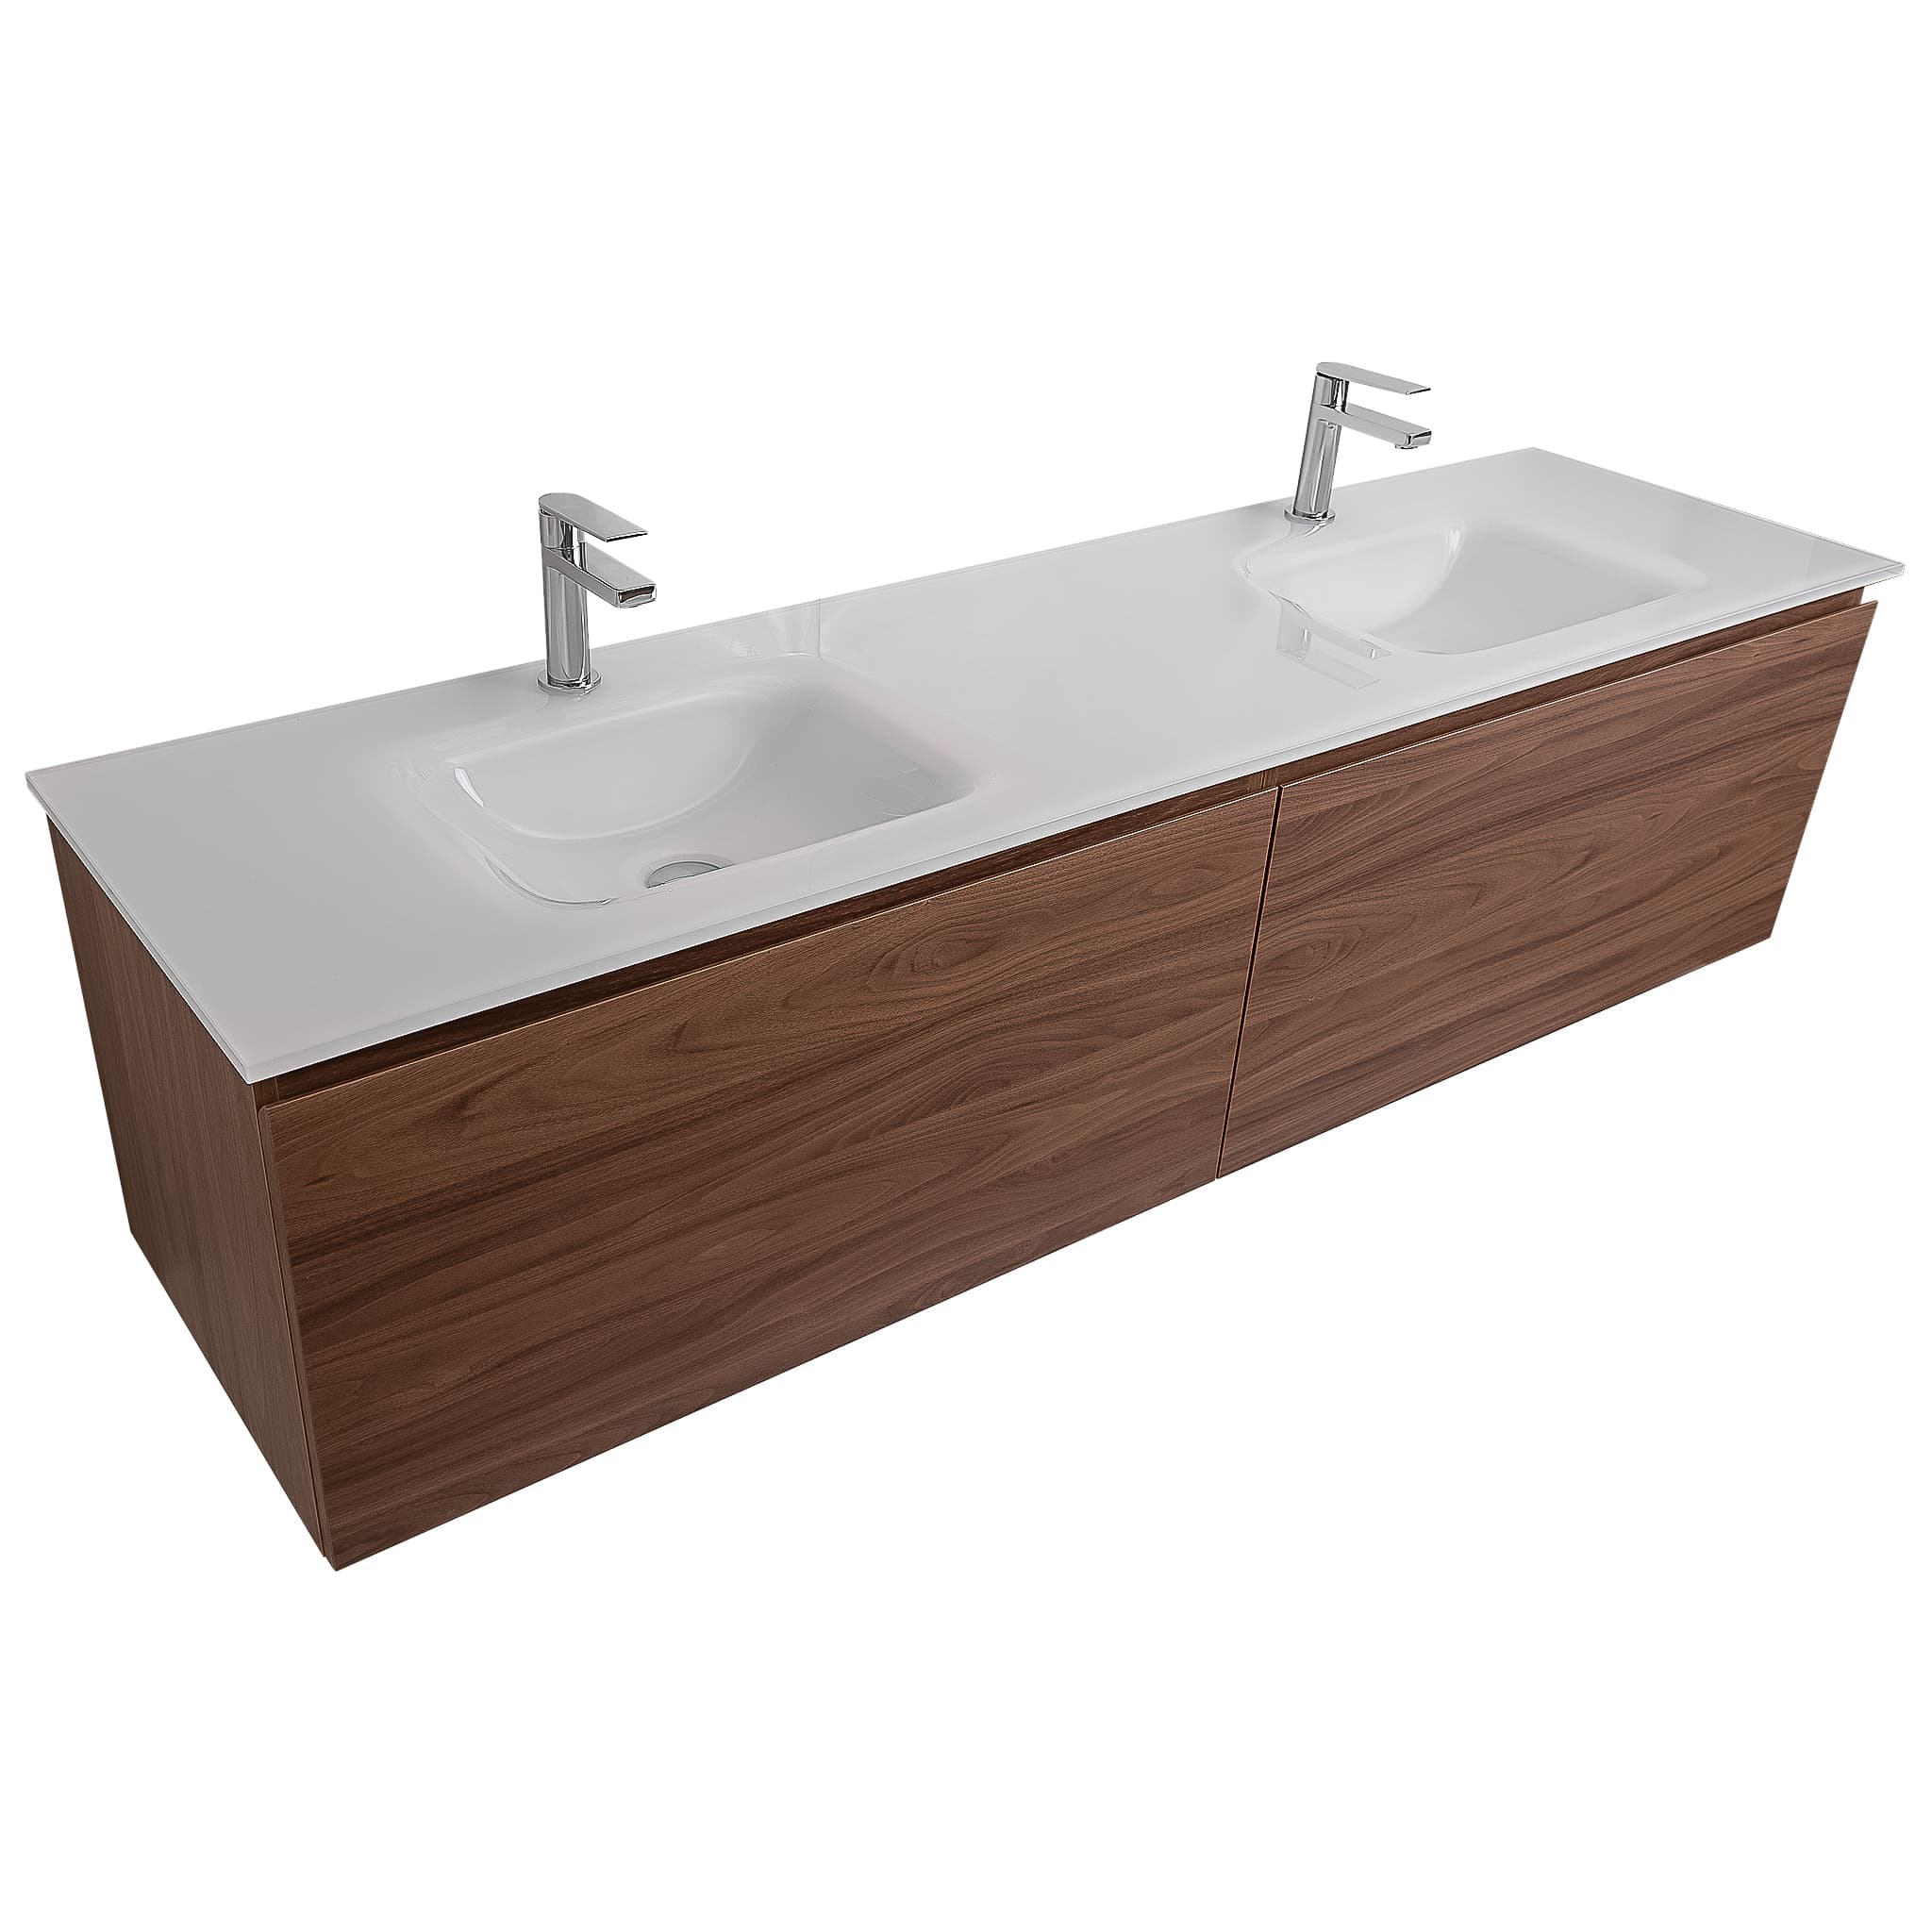 Venice 63 Walnut Wood Texture Cabinet, White Tempered Glass Double Sink, Wall Mounted Modern Vanity Set